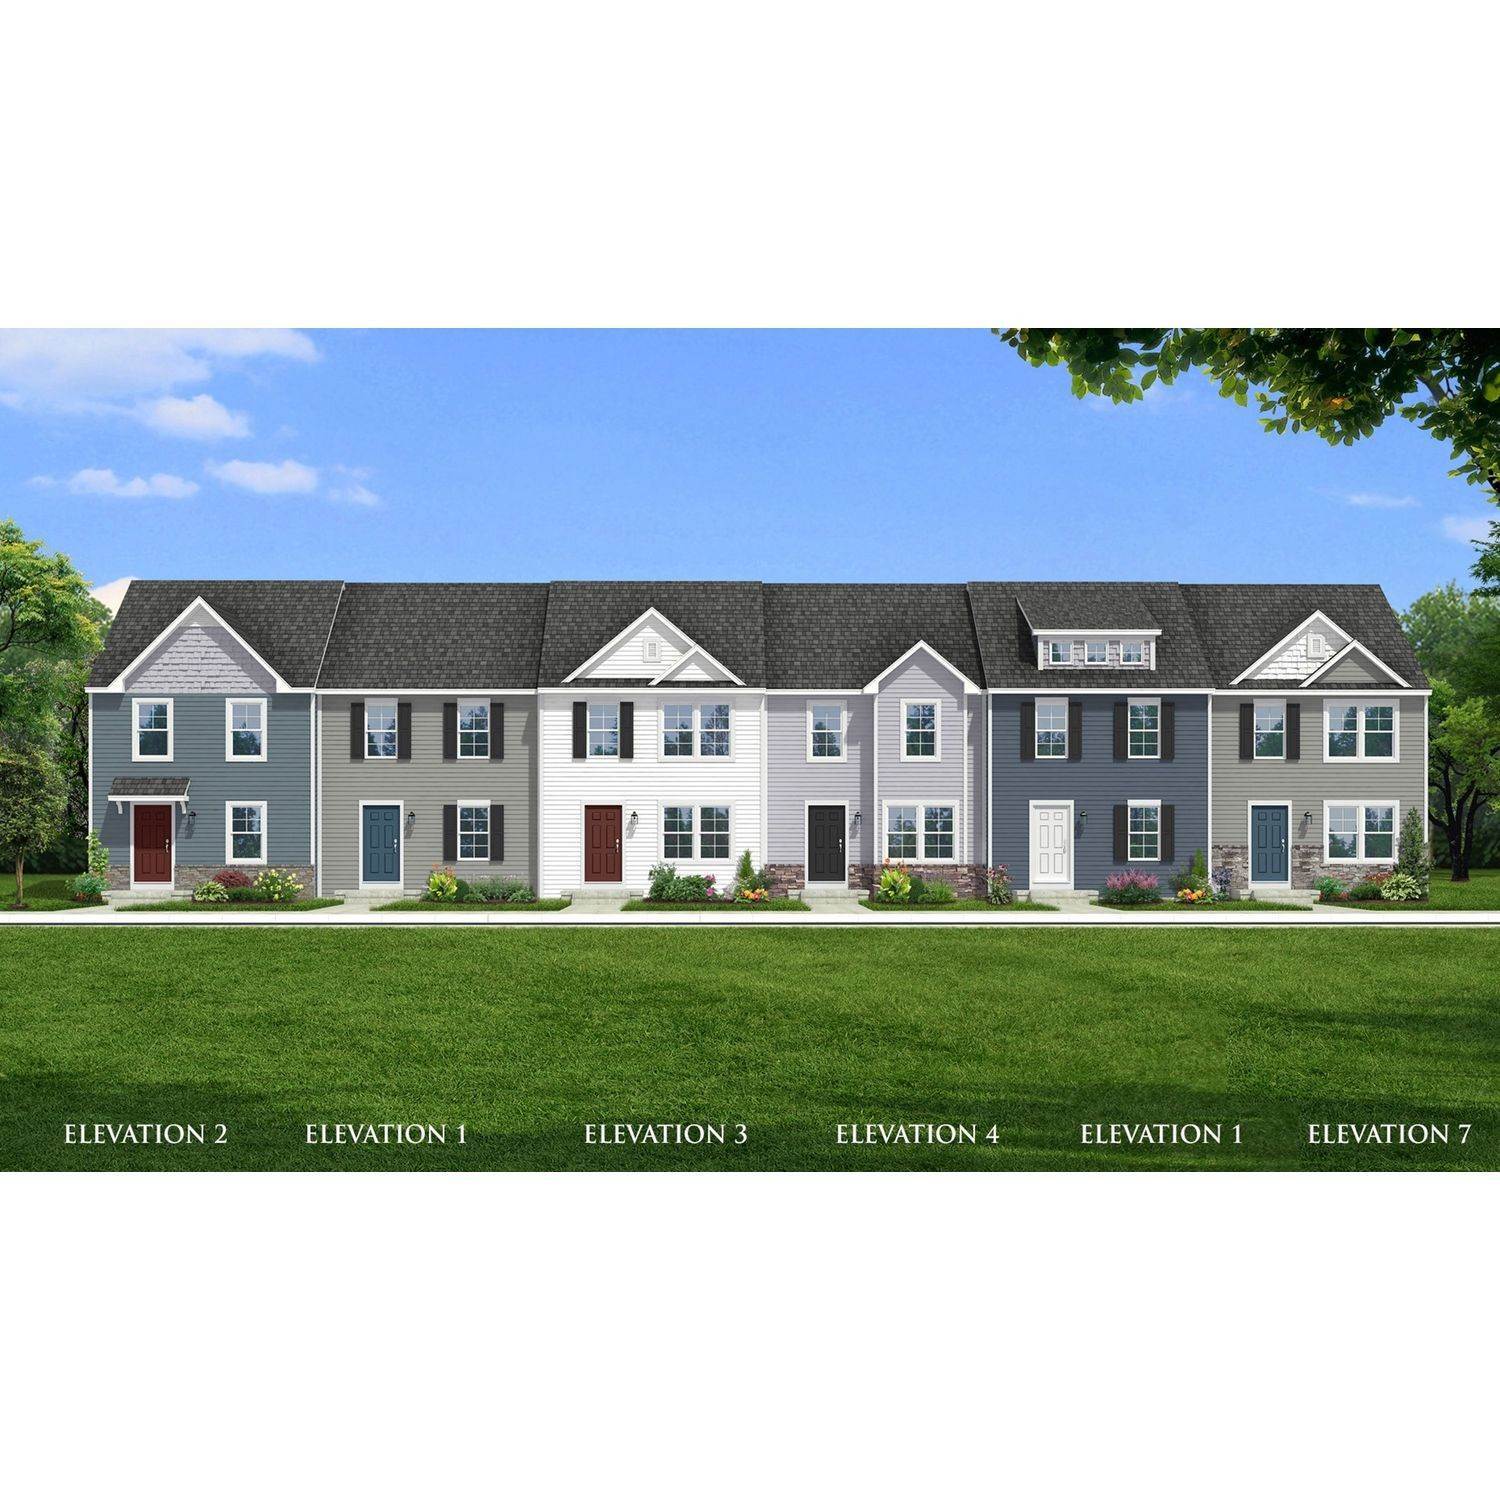 15. Whispering Pines Townhomes κτίριο σε 16 Loblolly Drive, Bunker Hill, WV 25413